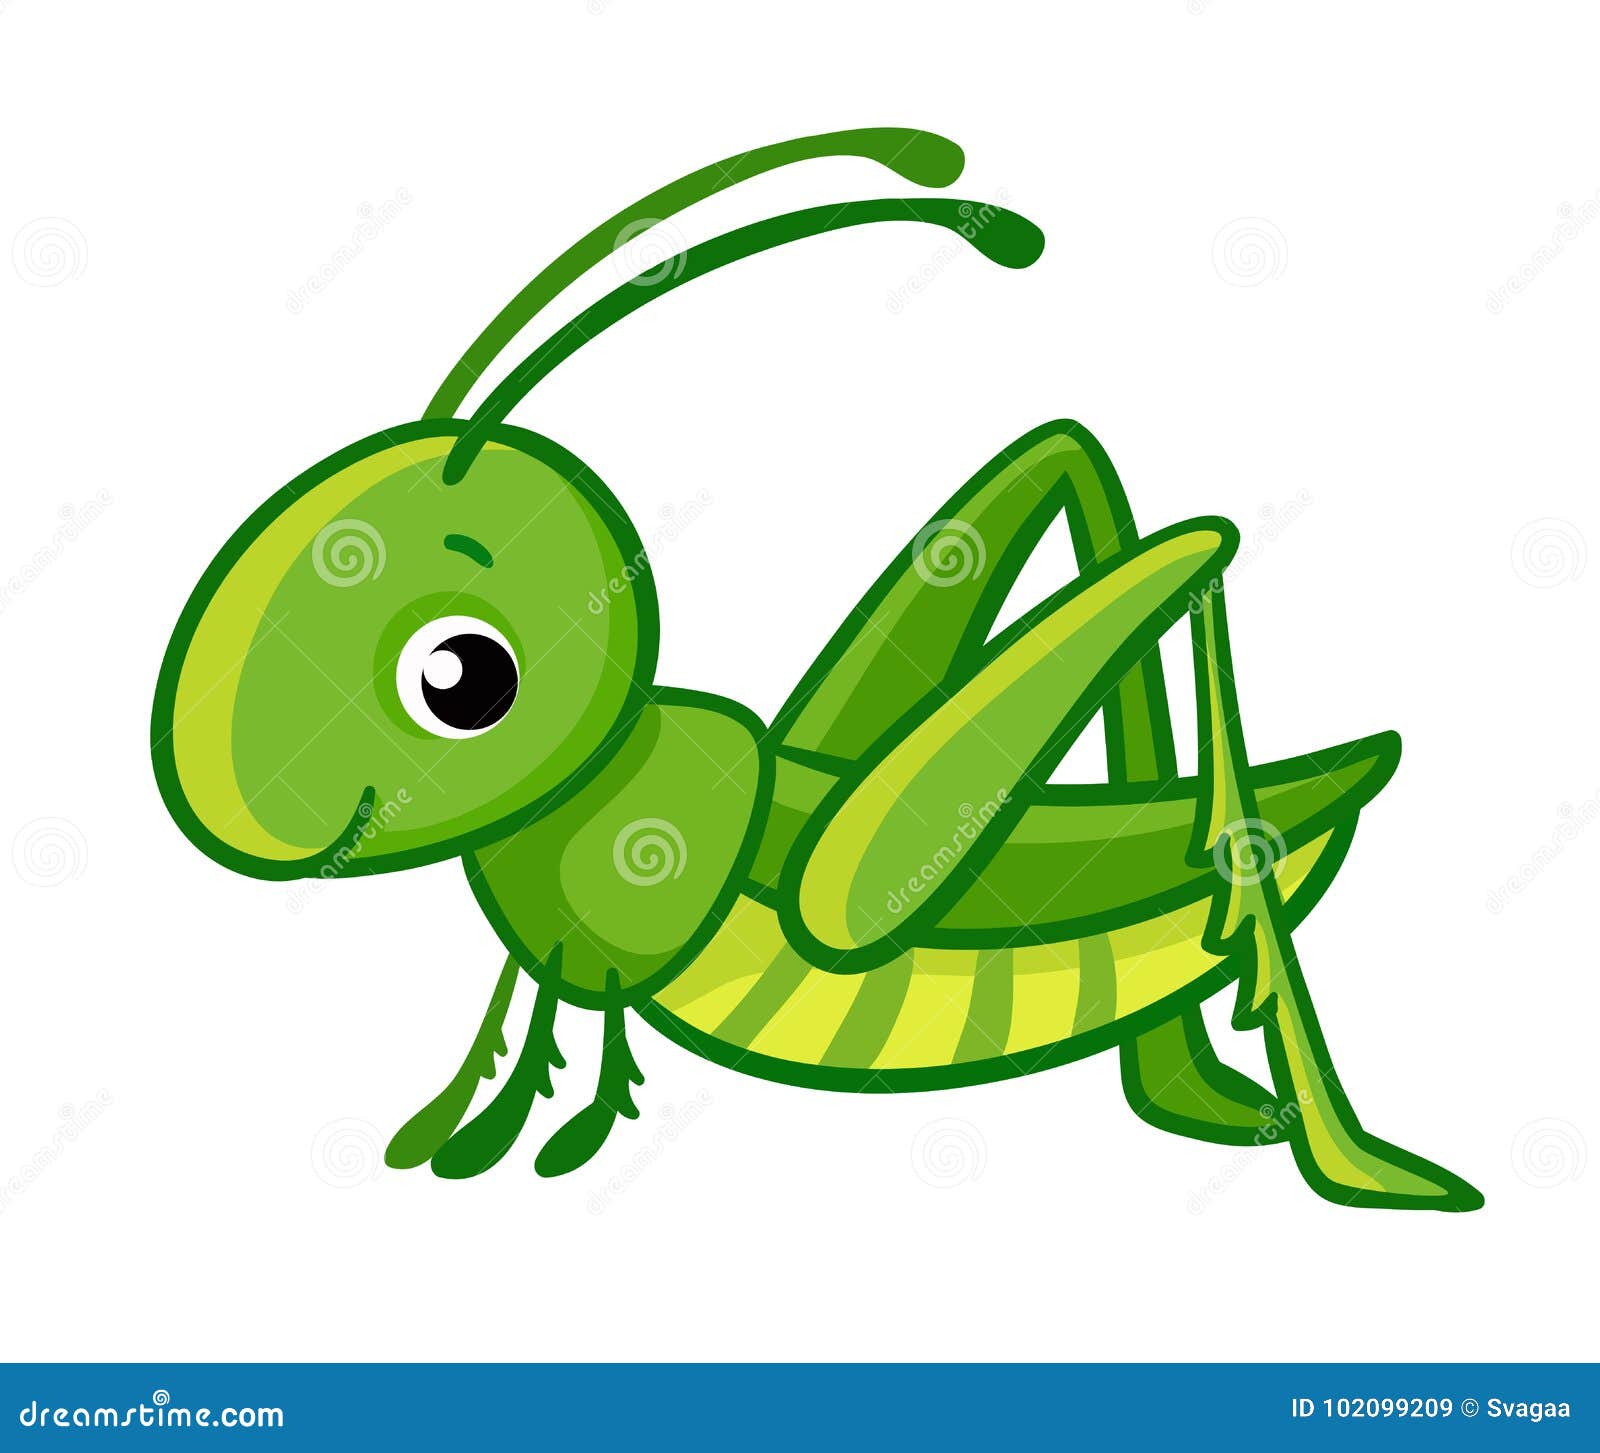 How to Draw a Grasshopper | A Step-by-Step Tutorial for Kids